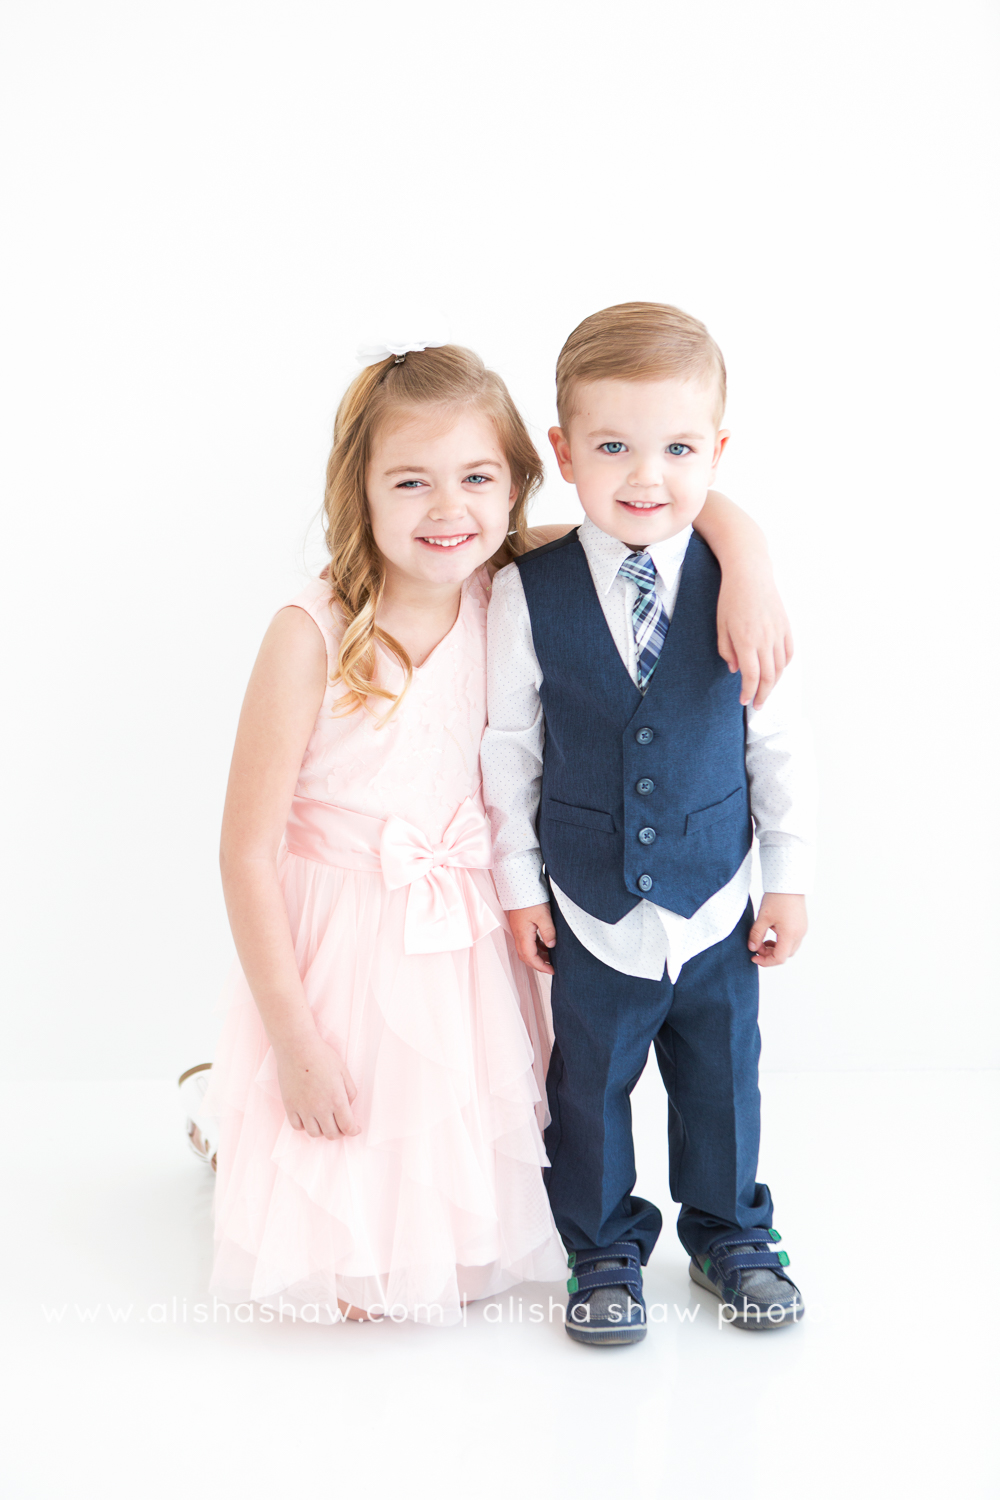 Siblings and Friends | St George Utah Child Photographer